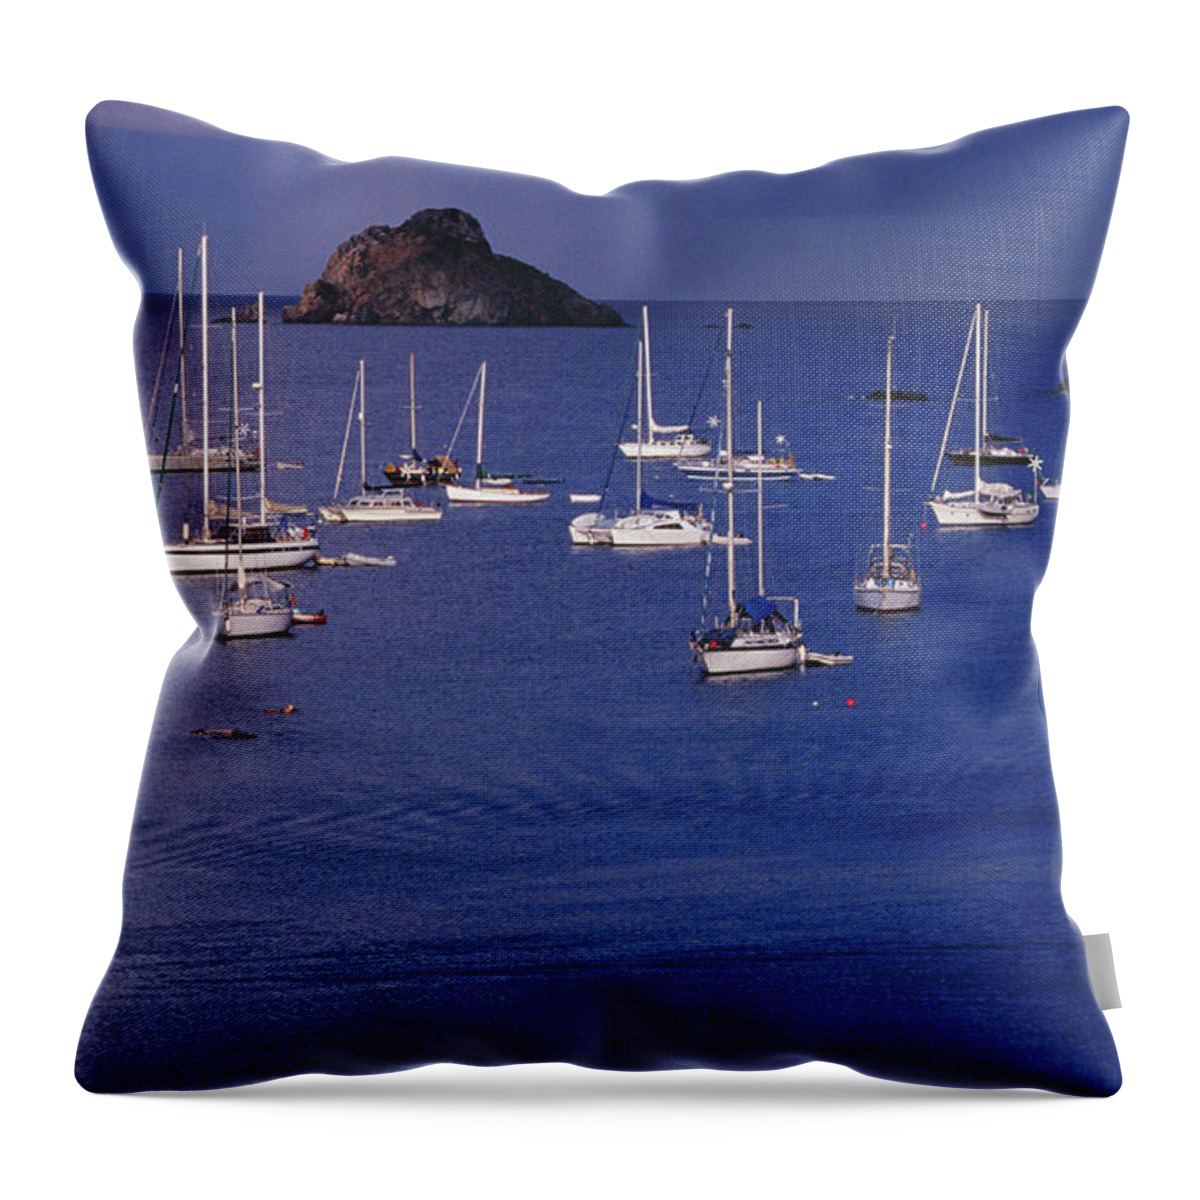 Sailboat Throw Pillow featuring the photograph Yachts Moored On The Caribbean Sea Near by Richard I'anson